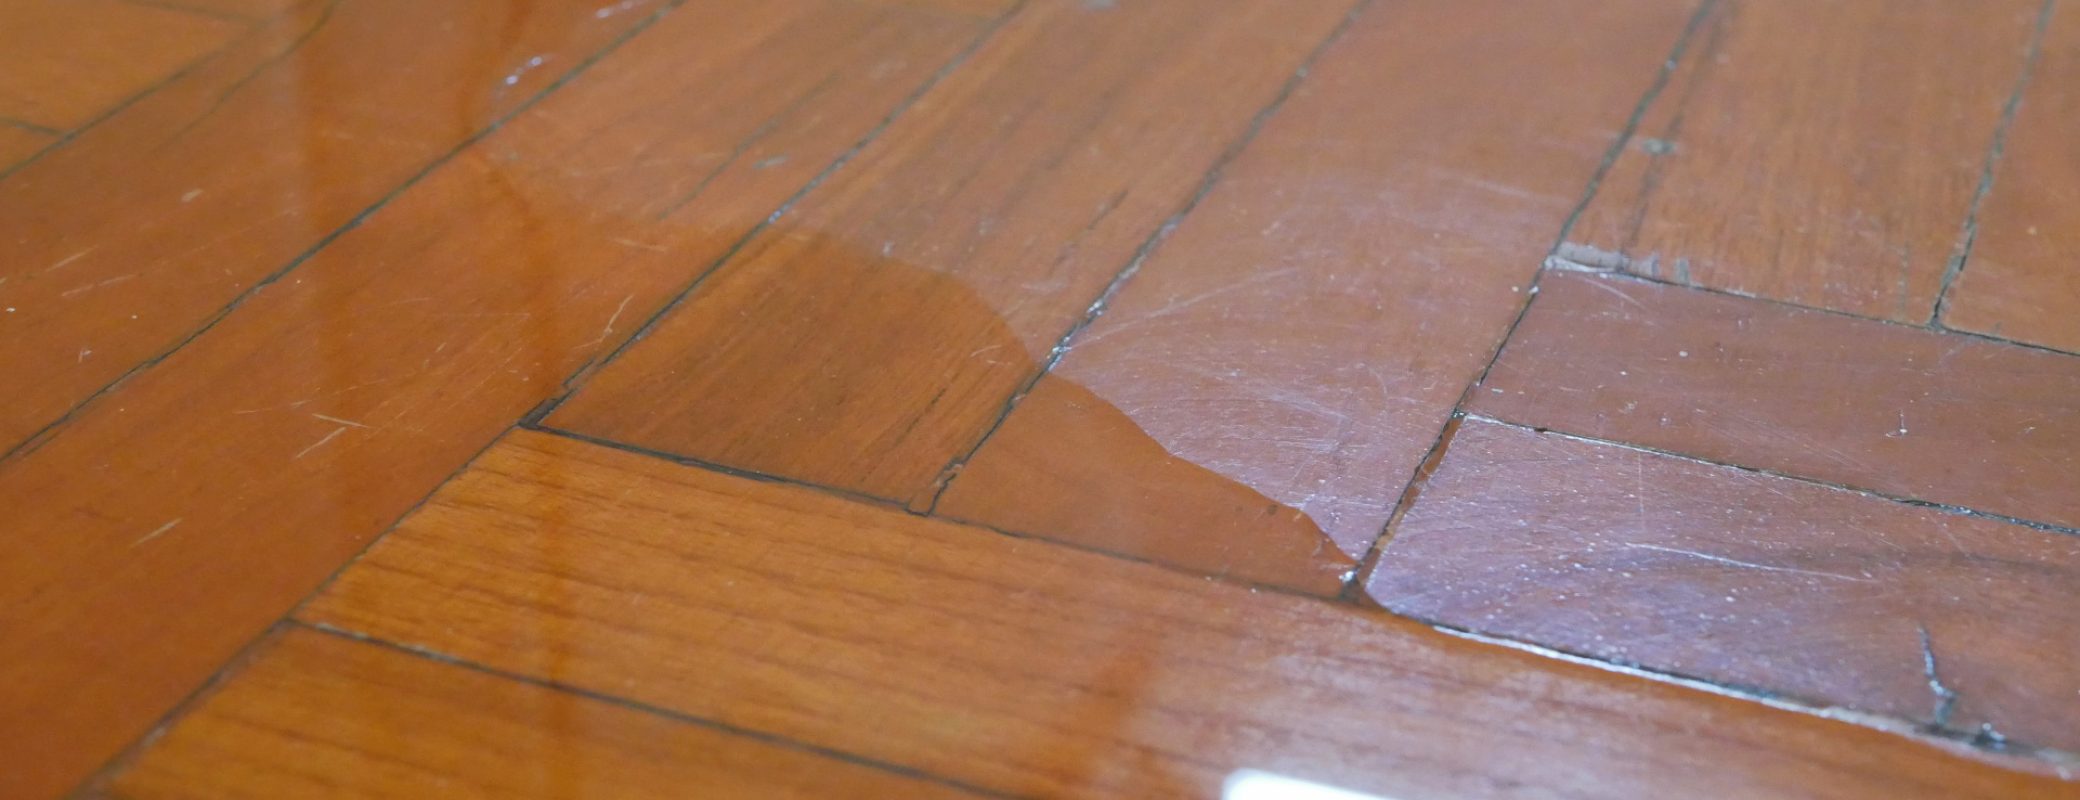 Close up of water spreading / flooding on the parquet floor of a house - damage caused by water leakage